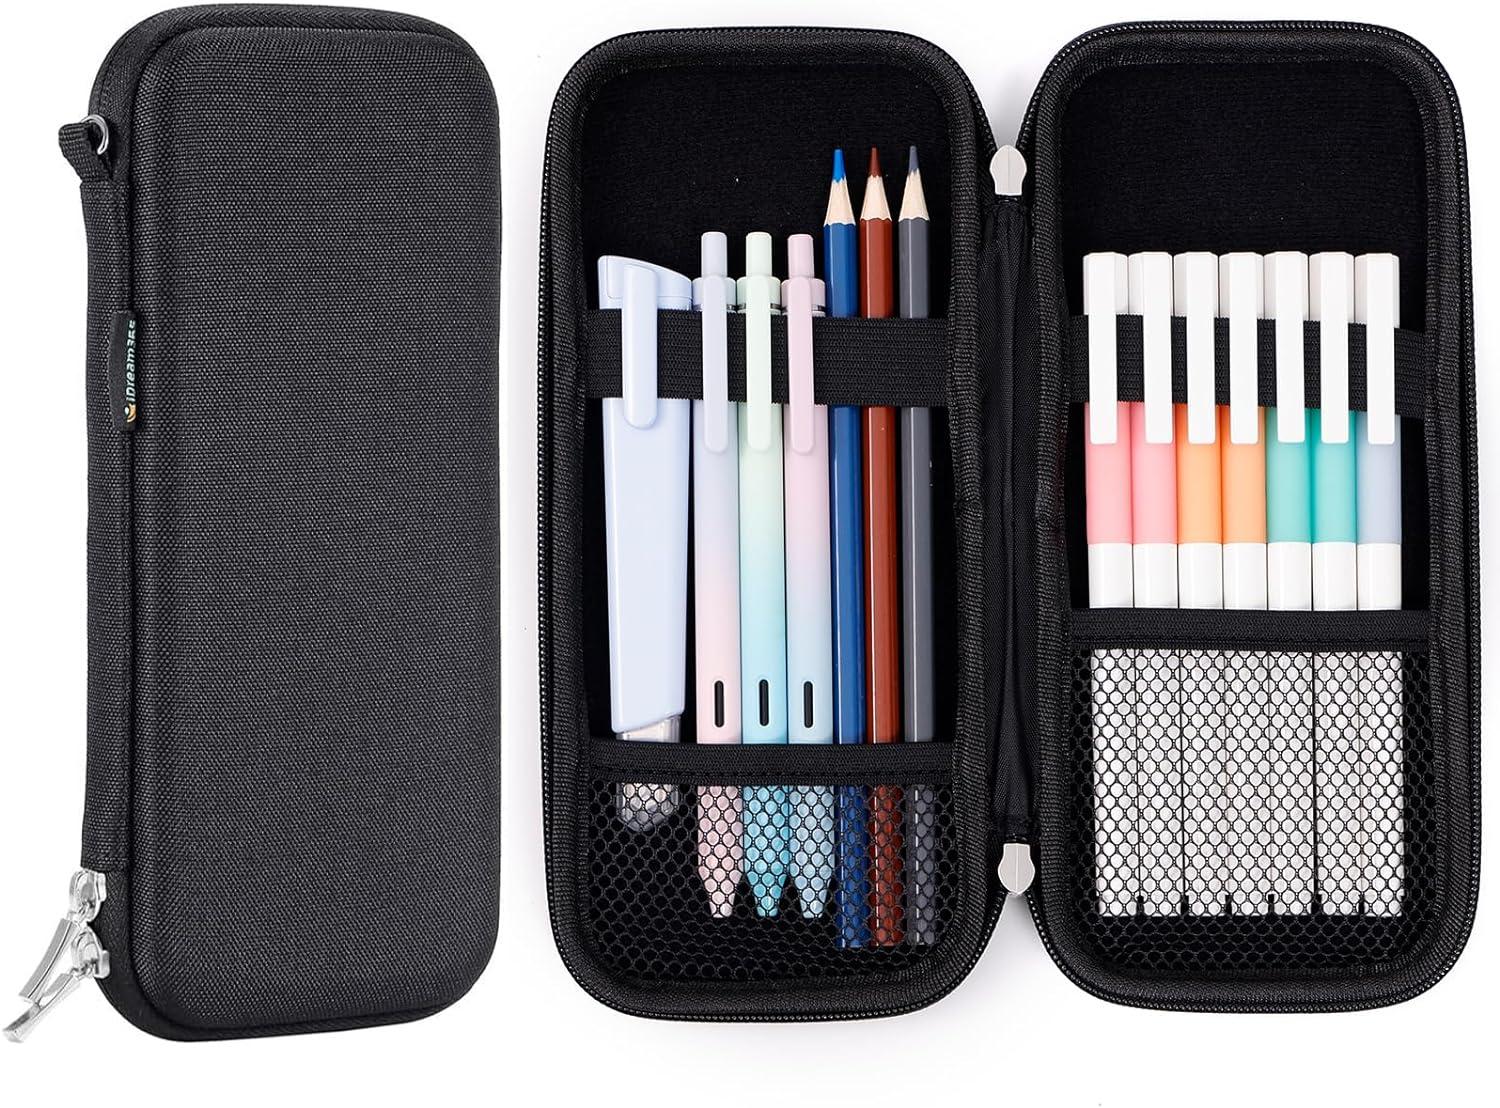 idream365 upgraded hard pencil case box for audlts durable pen carrying case with zipper black  idream365